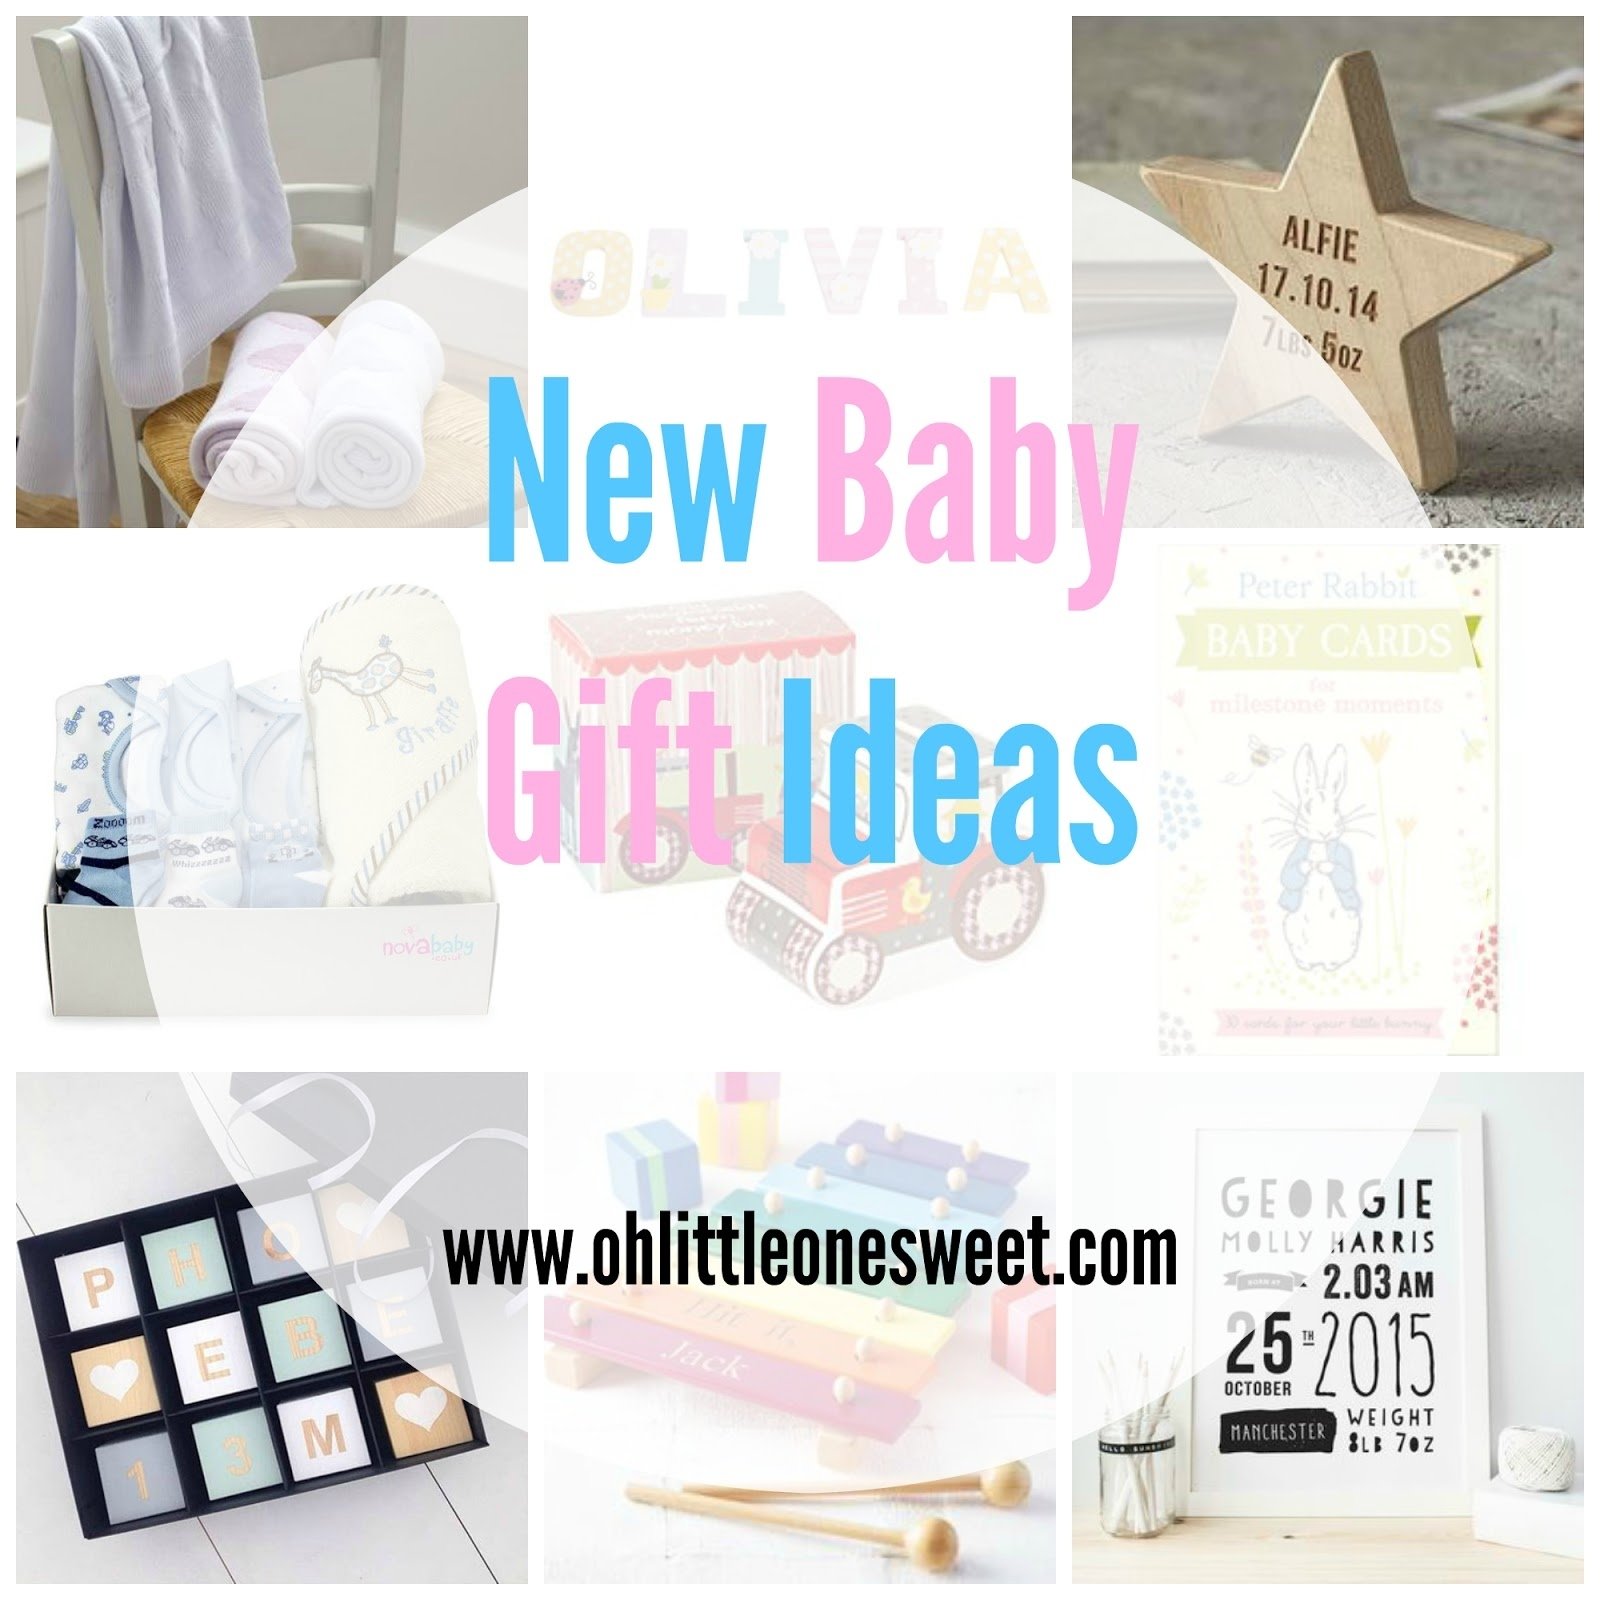 10 Unique Gift Ideas For New Baby new baby gift ideas oh little one sweet 2022